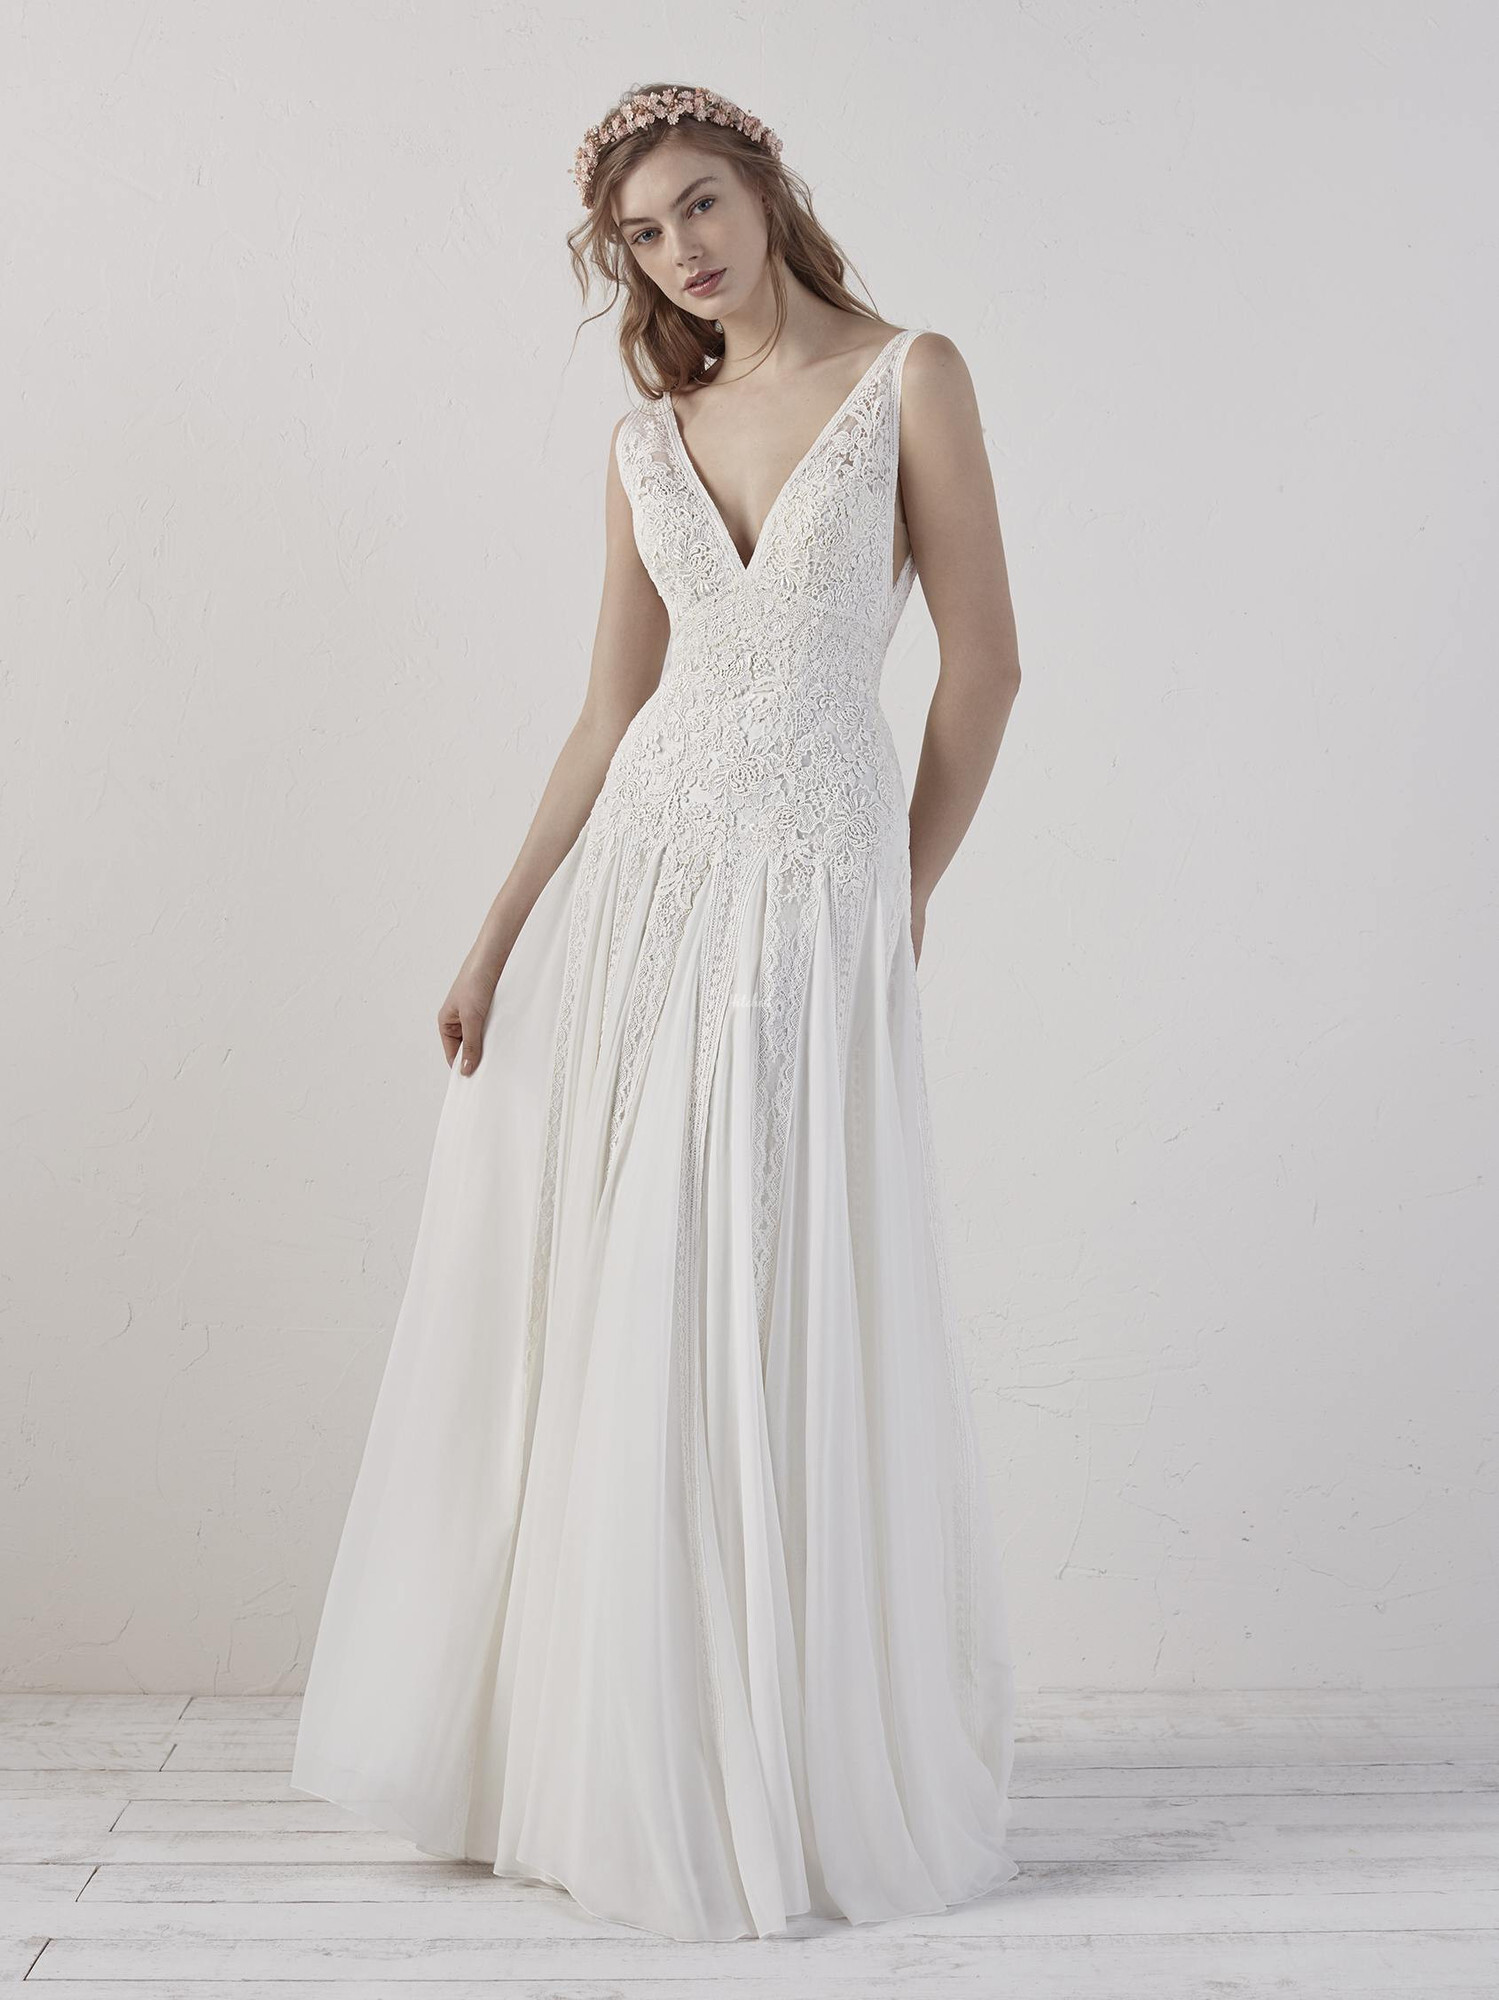 EILEEN Wedding Dress from Pronovias - hitched.co.uk